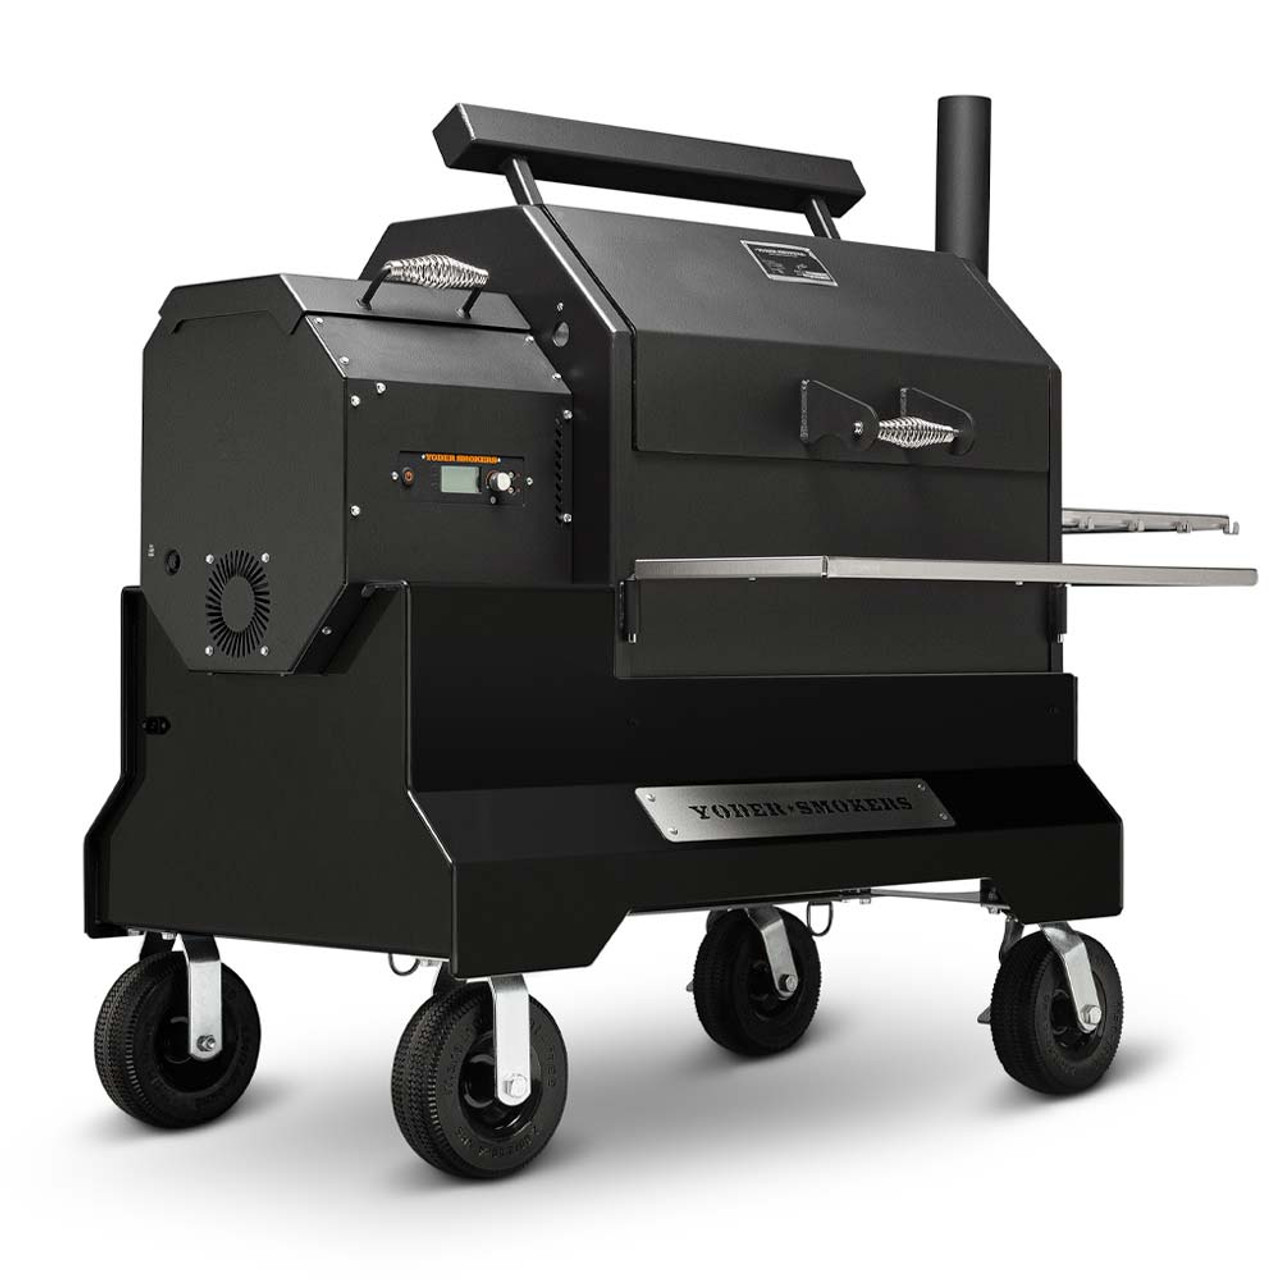 Wood Fired Oven for the YS1500 Pellet Grill